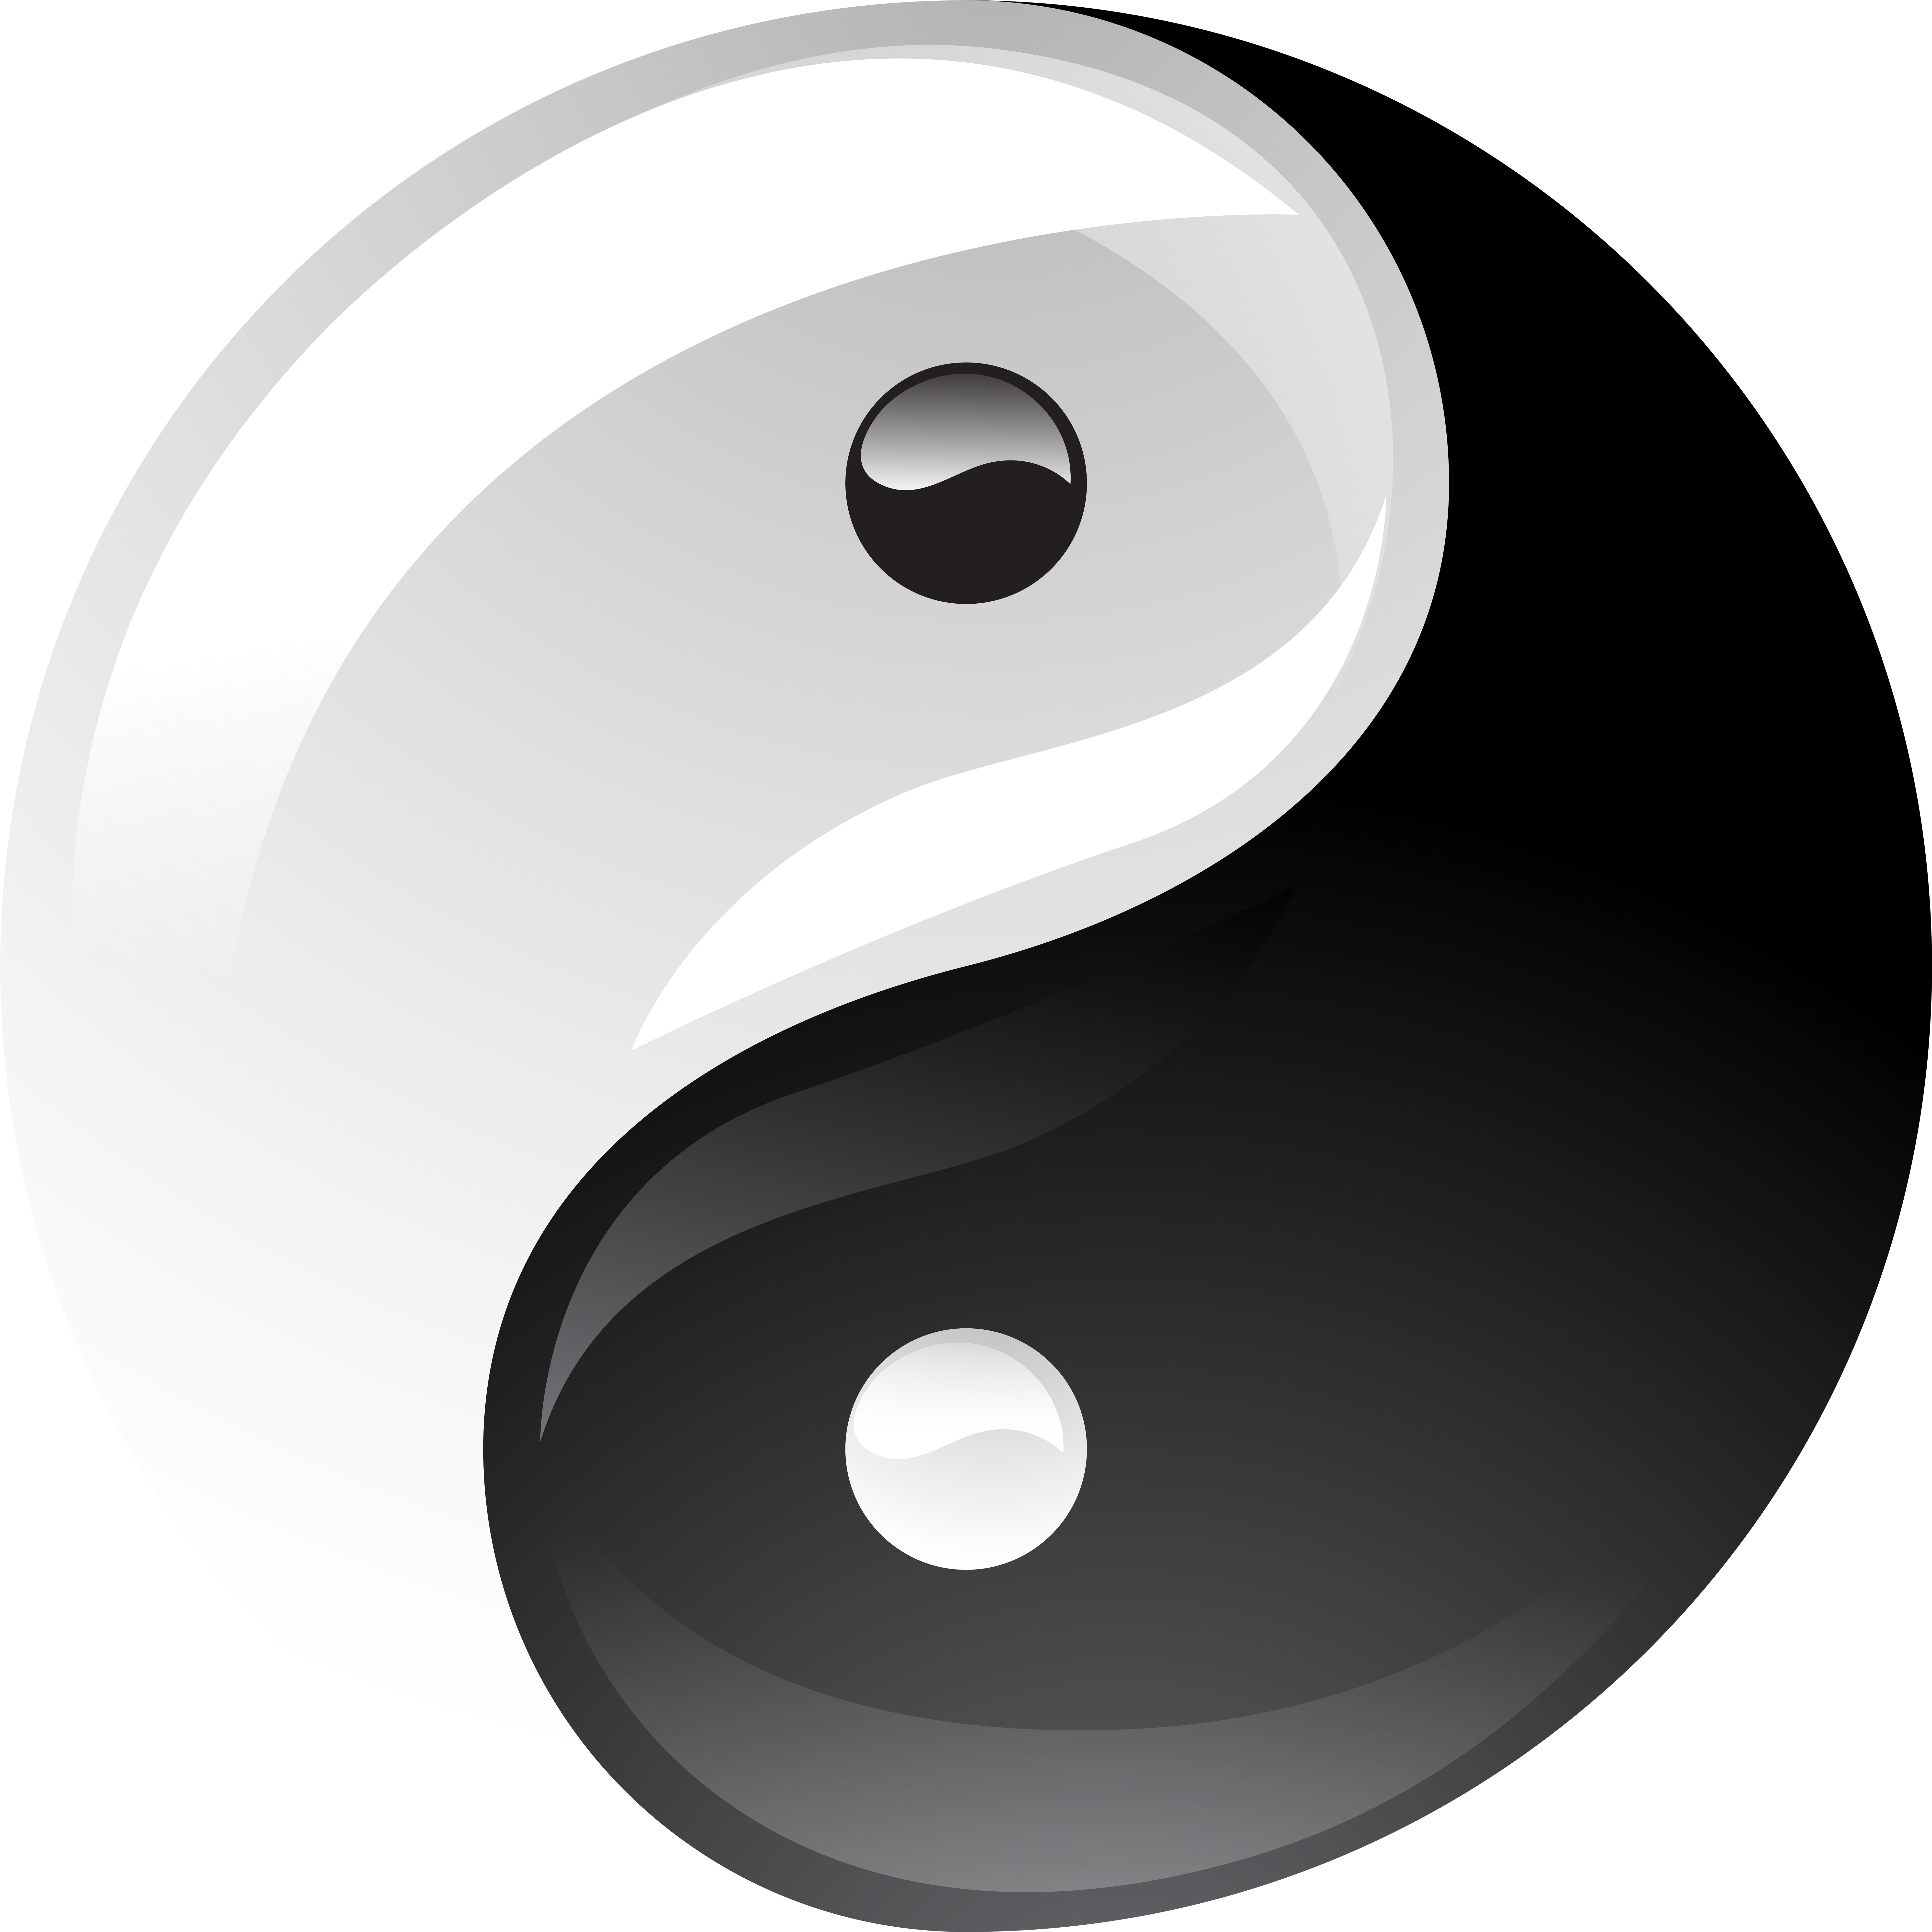 Find This Pin And More On Yin Yang By Adolfo3413 - Find This Pin And More On Yin Yang By Adolfo3413 (8000x8000)